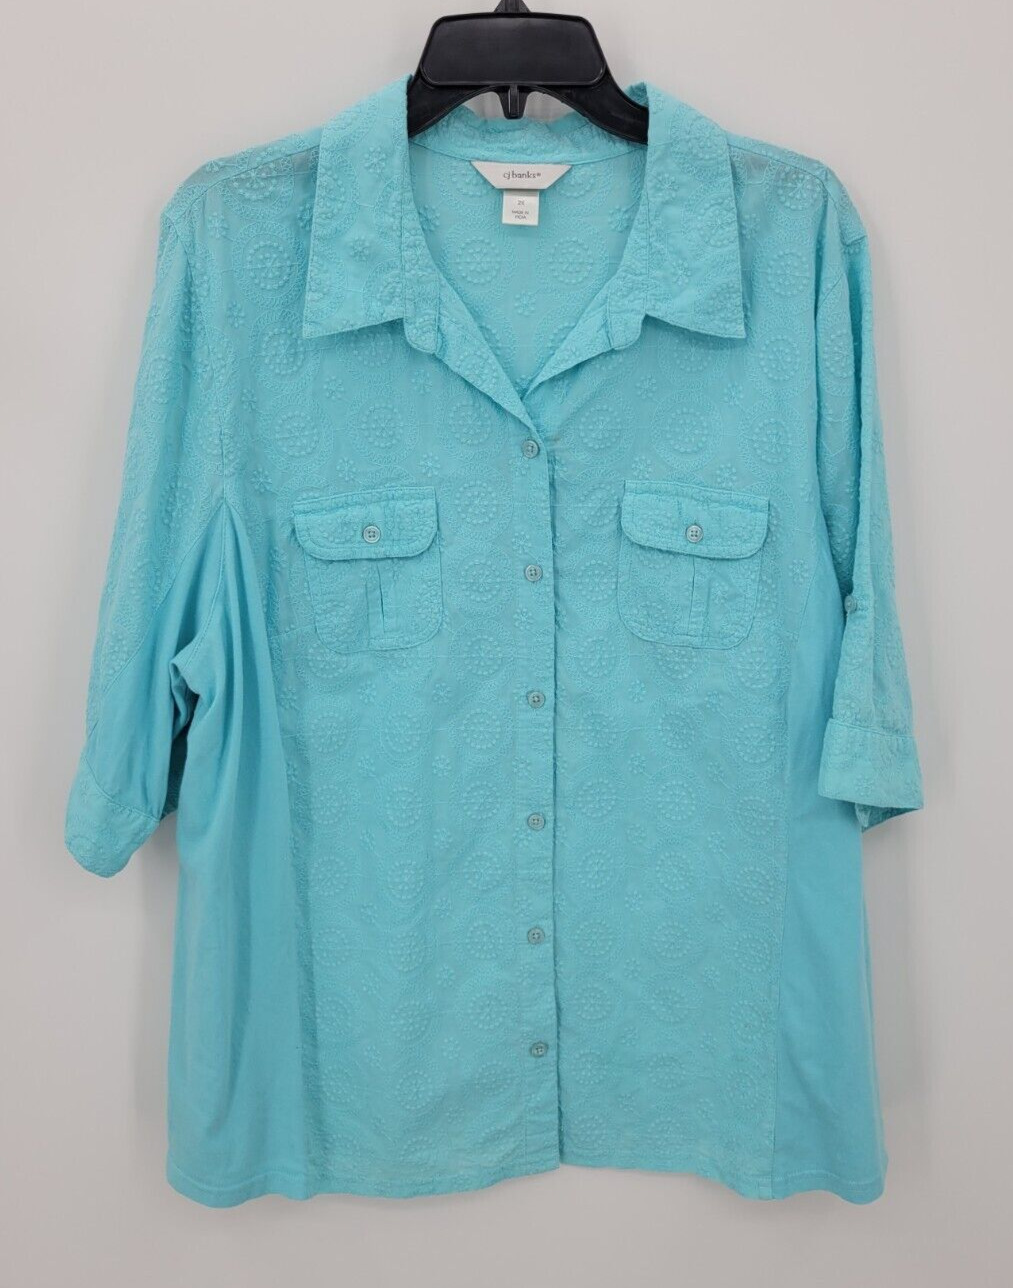 CJ Banks Top Womens Plus 2X Blue Textured Short Sleeve Button Up Casual Artsy